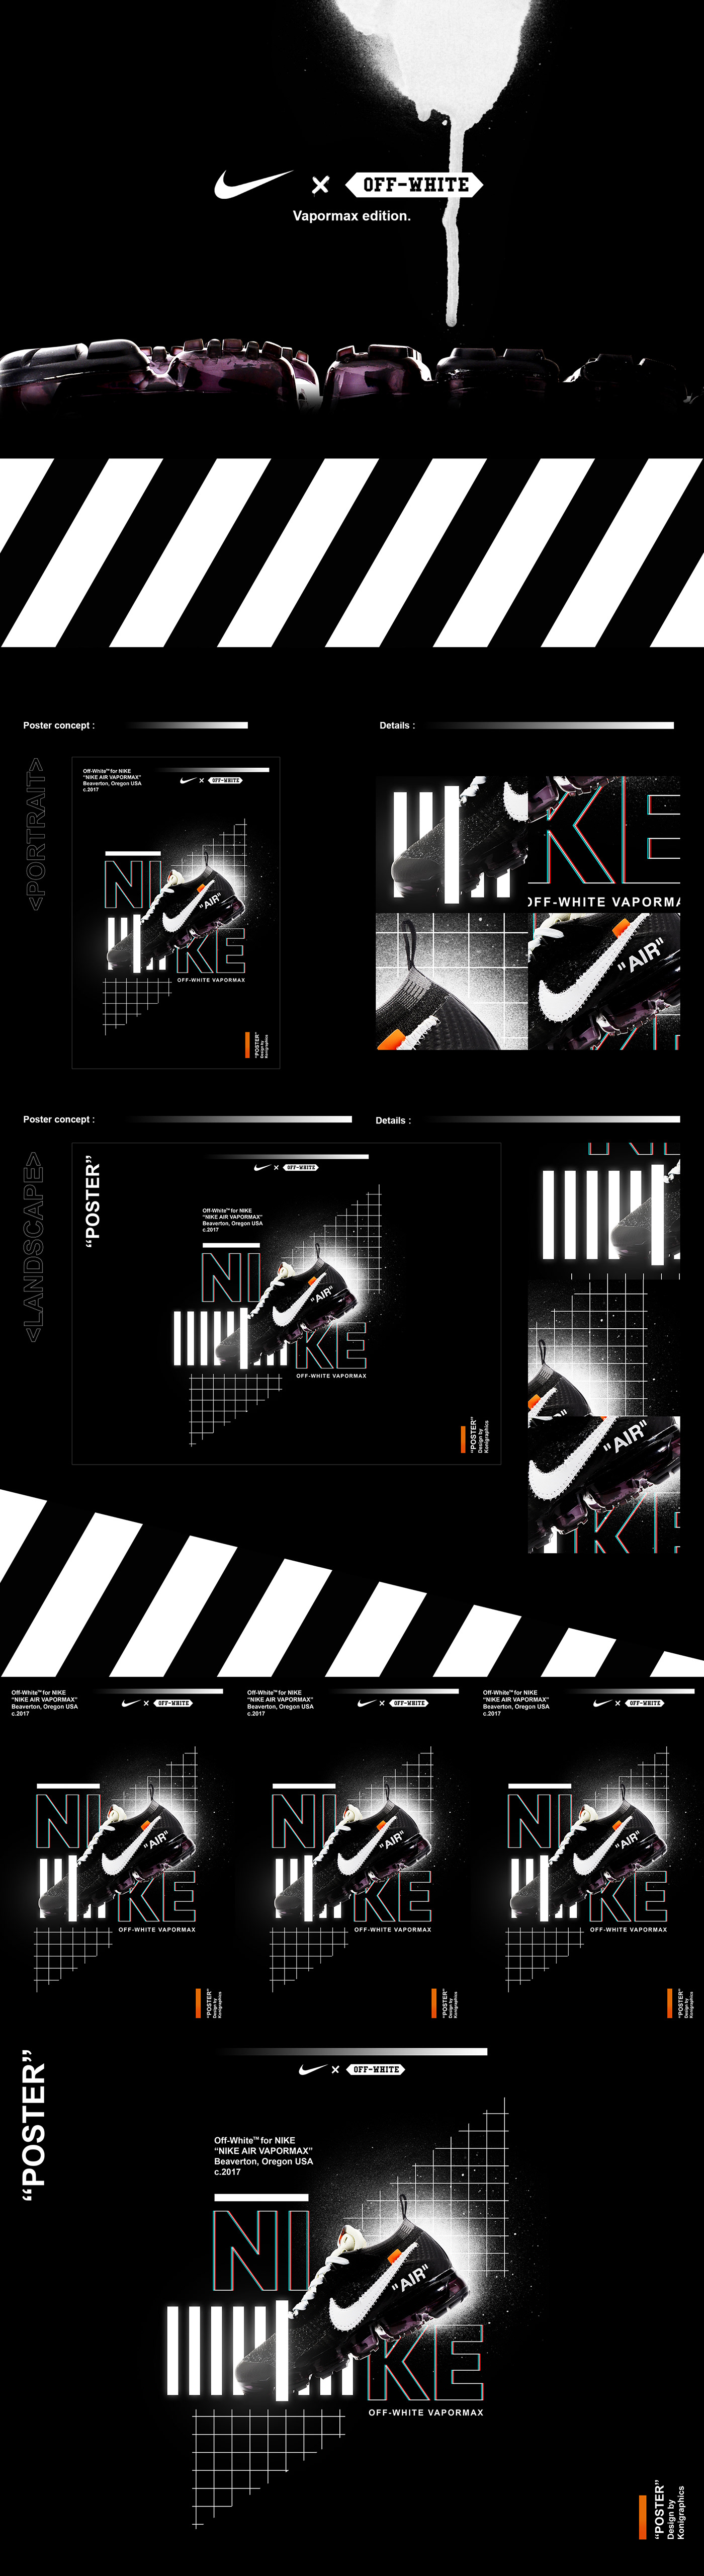 Nike vapormax off-white poster design graphism photoshop concept